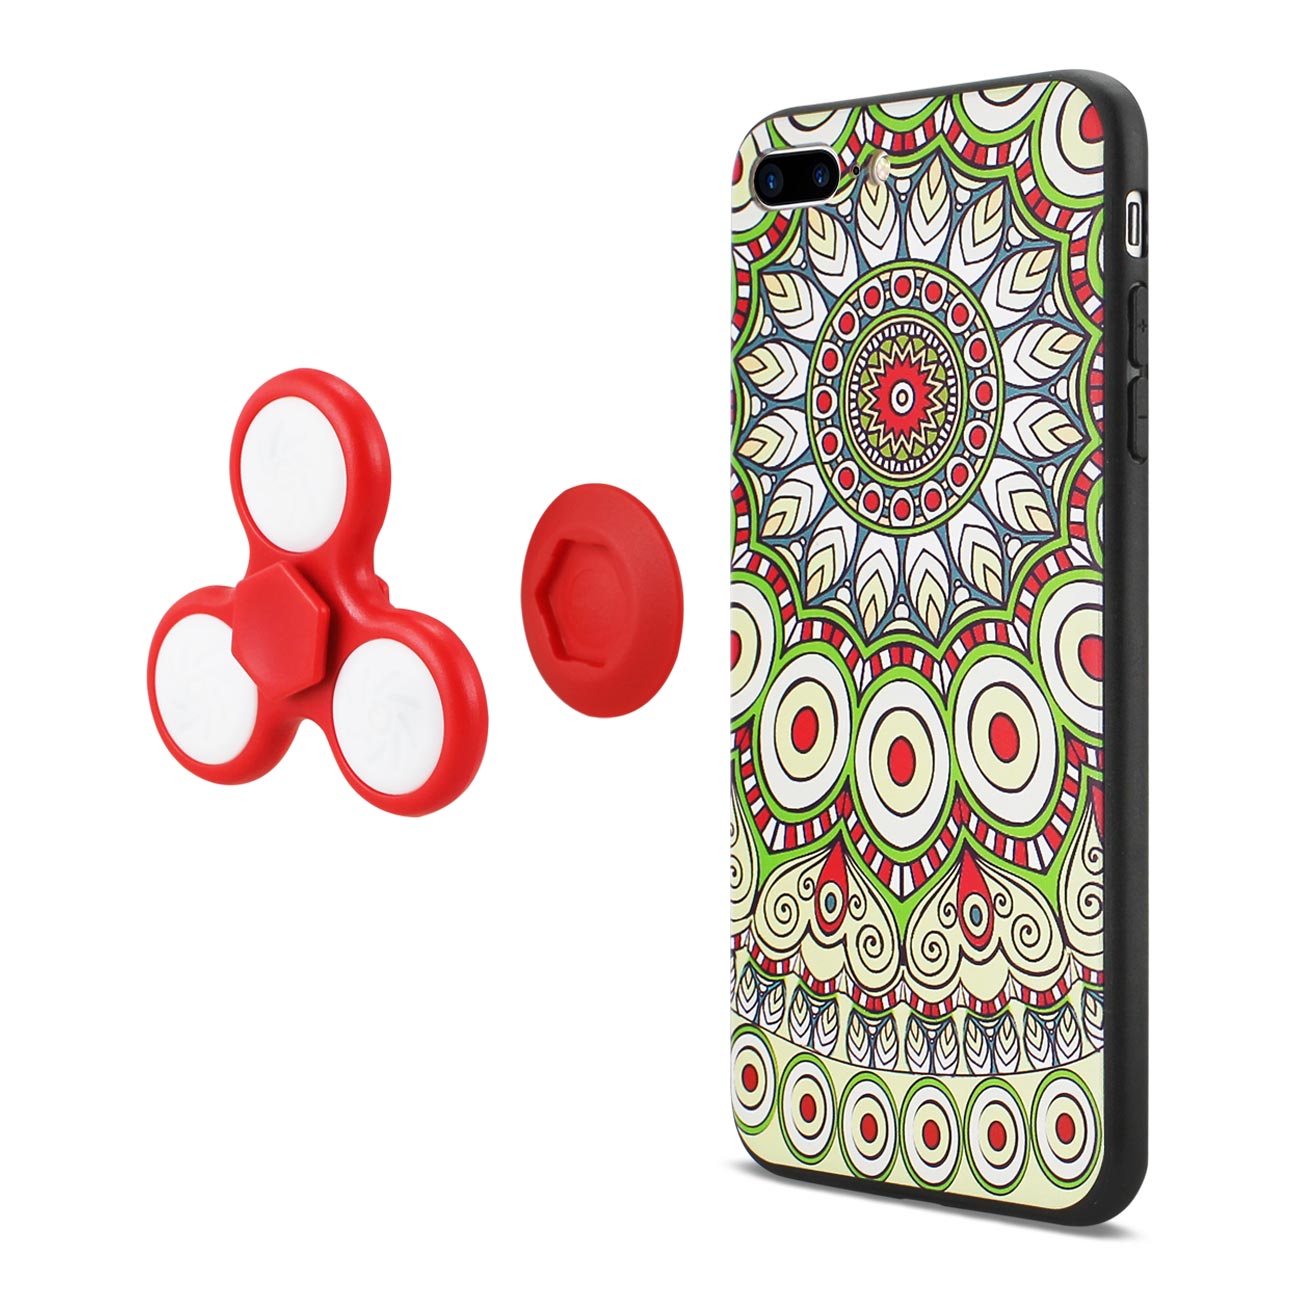 Case With LED Fidget Spinner Clip On The Inspiration Of Peacock Design iPhone 7 Plus Beige Color